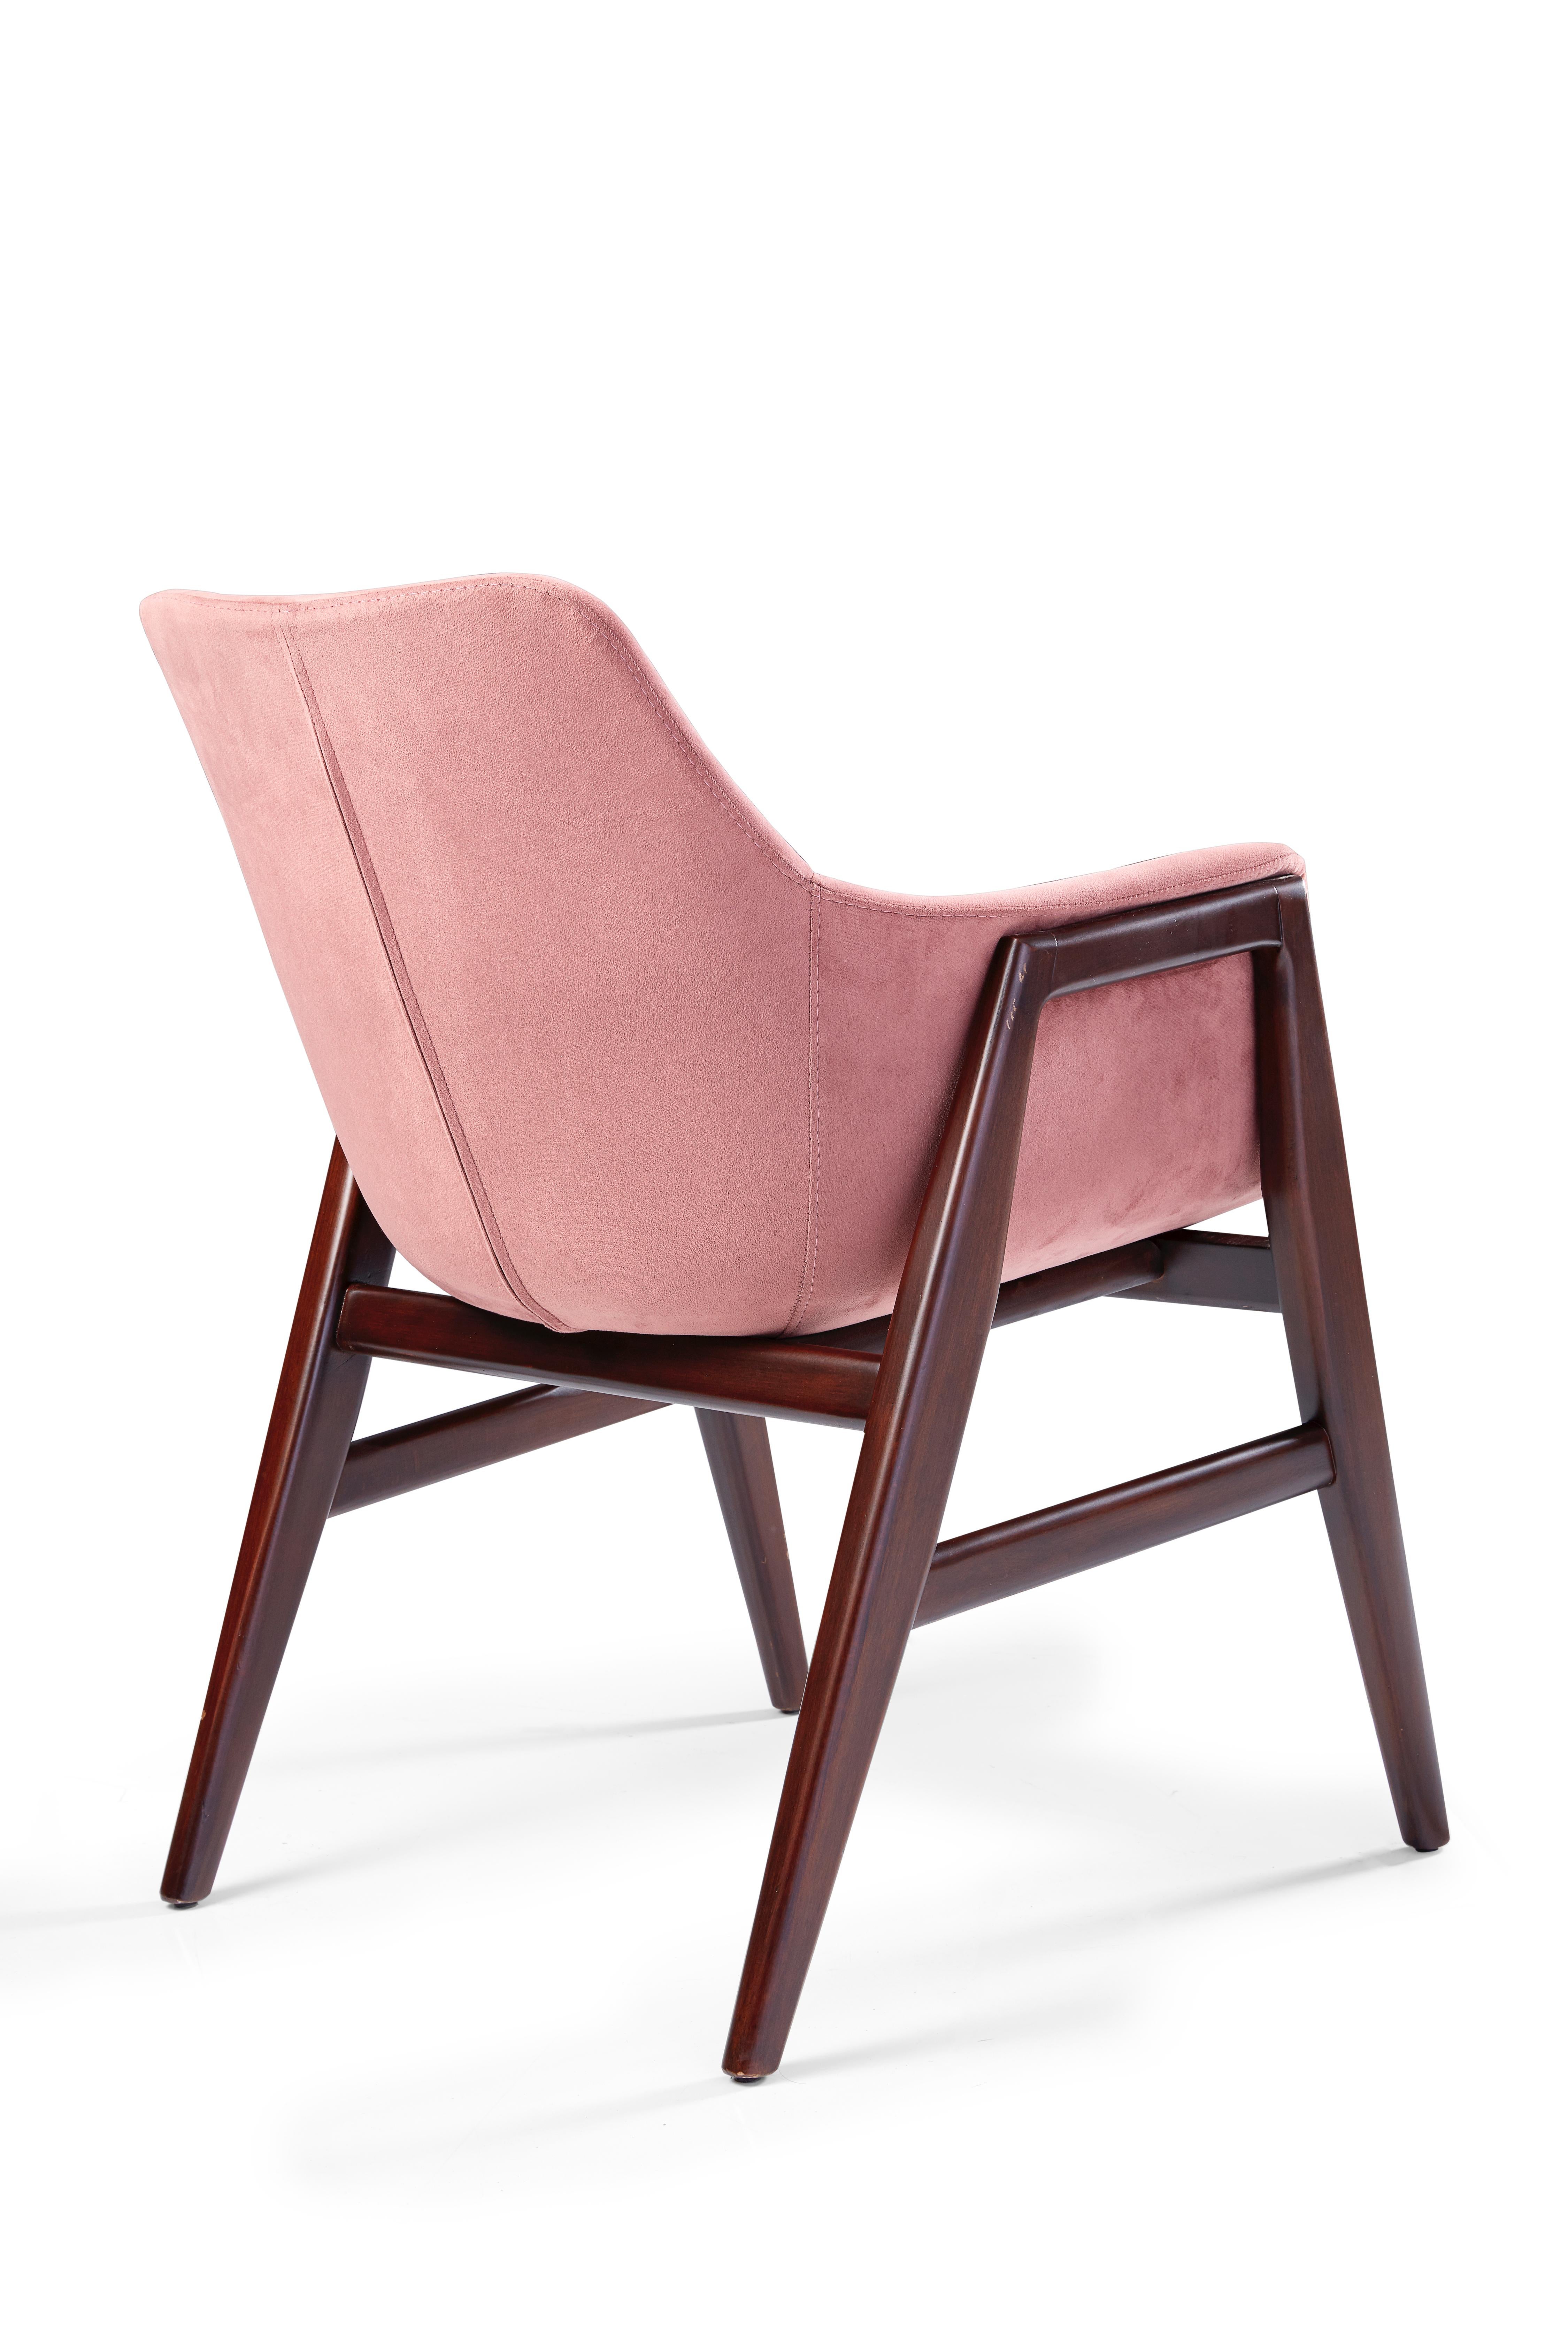 With sleek, angular lines and a beautiful hand-finish, the Rodos chair is the epitome of chic city style. Designed like a slim lounge chair, the fully upholstered seat and back bring comfort with a modern sensibility.